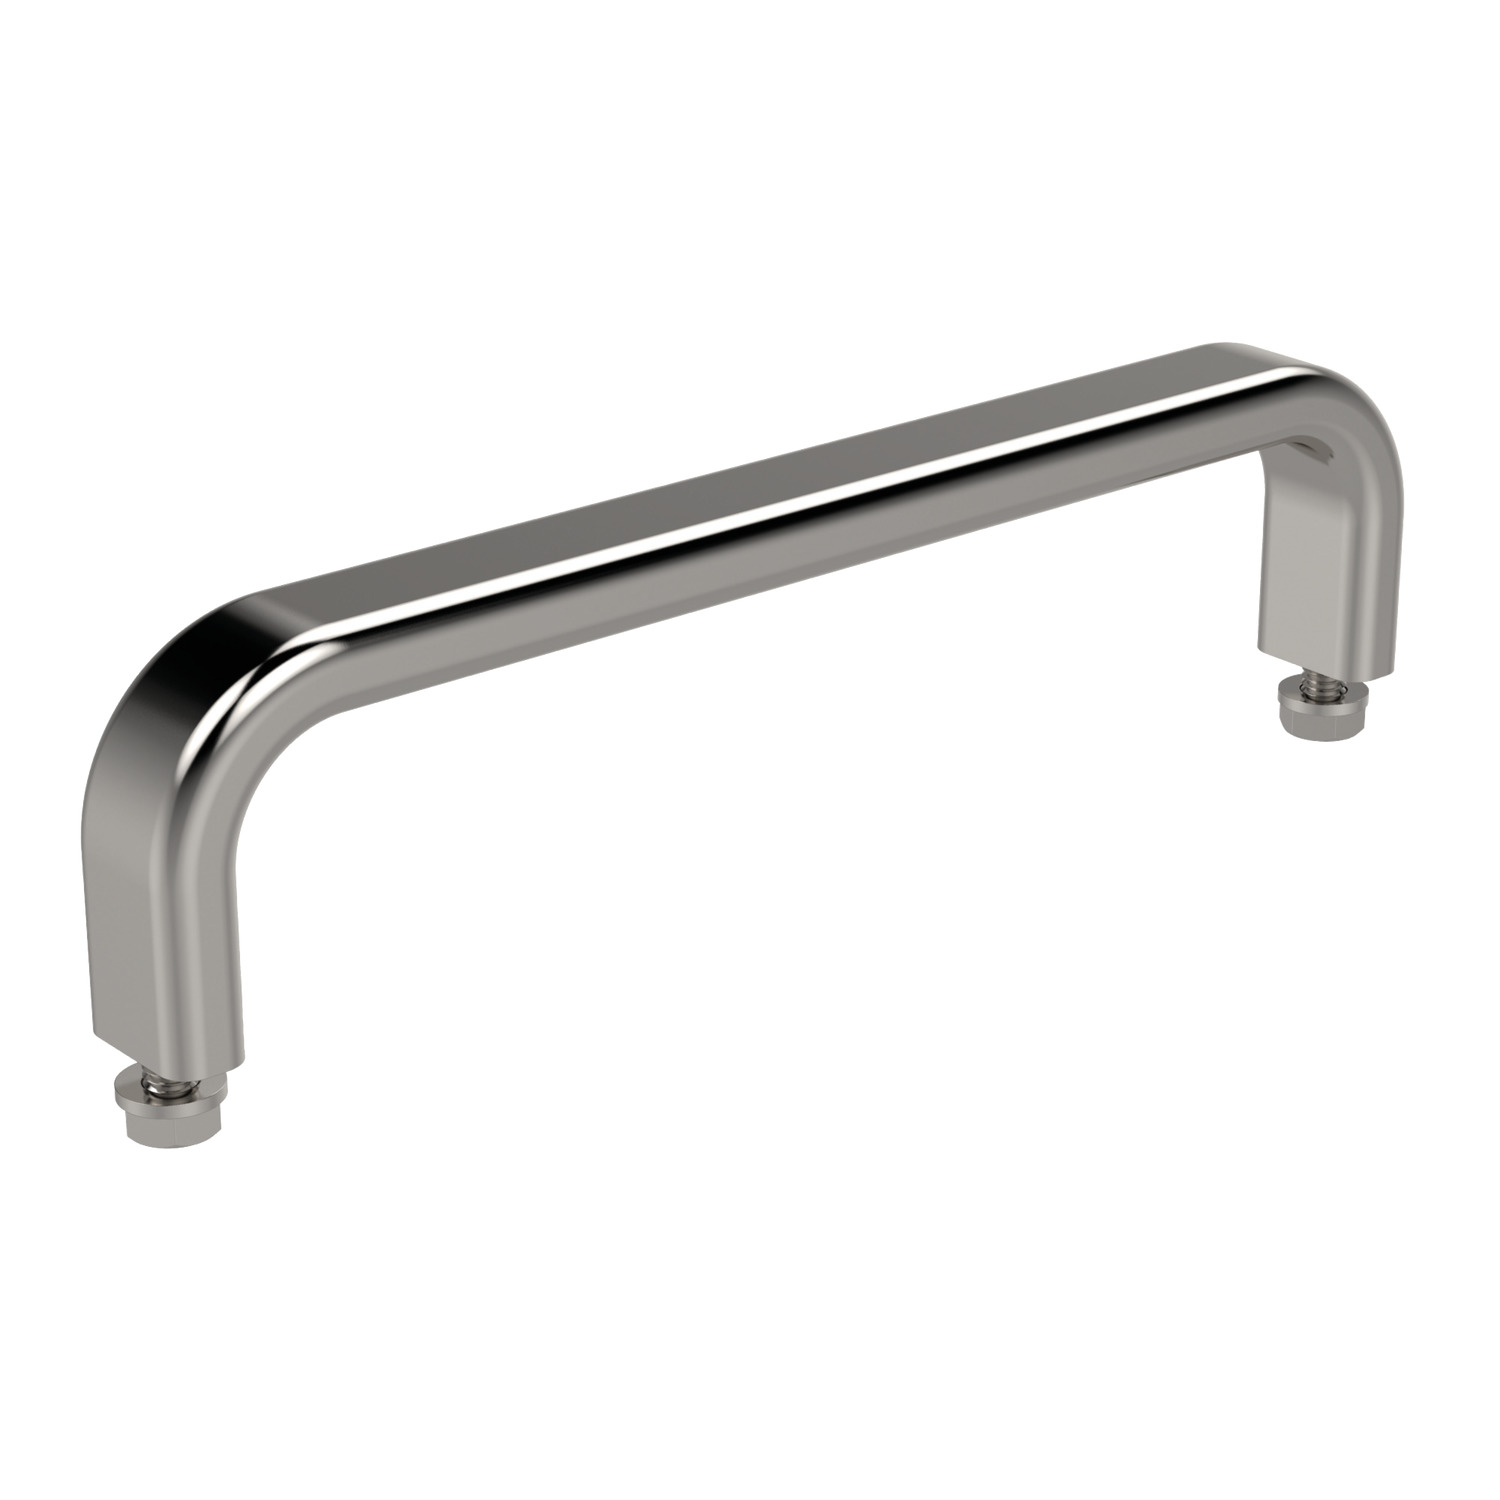 78920 - Pull Handles - Oval Type